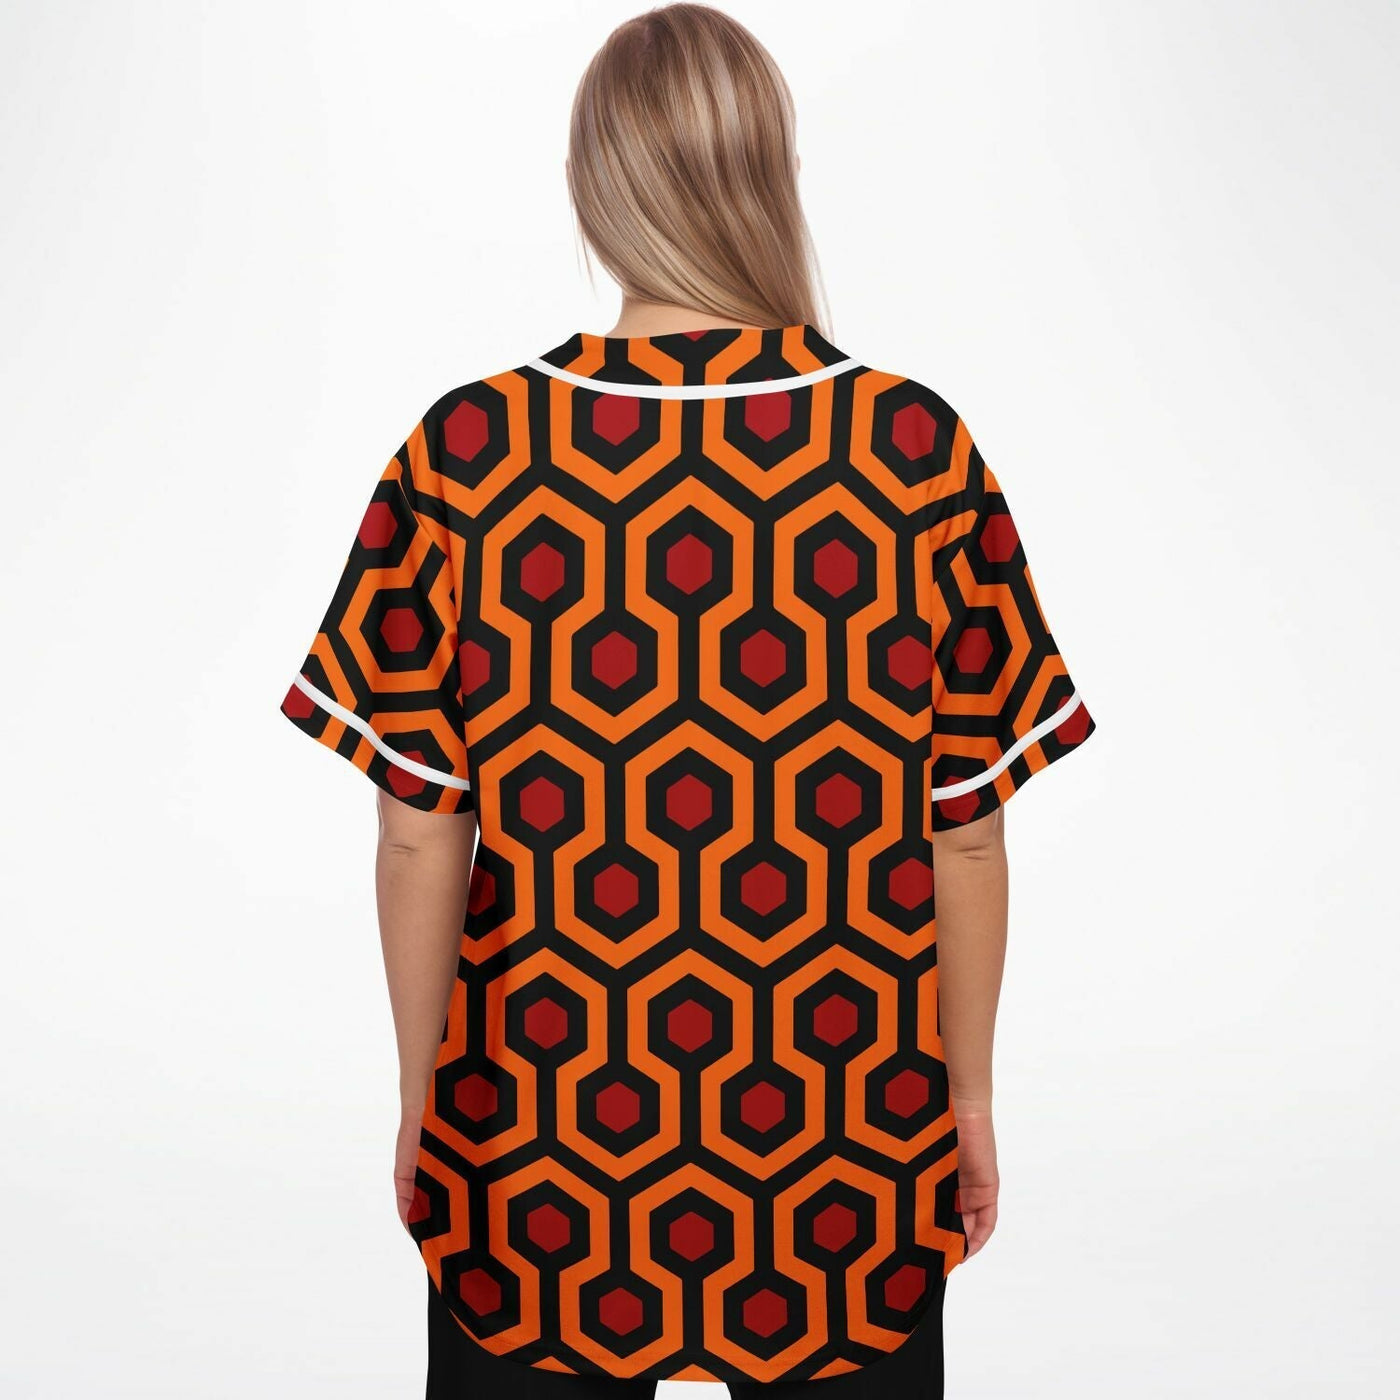 The Shining Baseball Jersey with Overlook Hotel Carpet Pattern